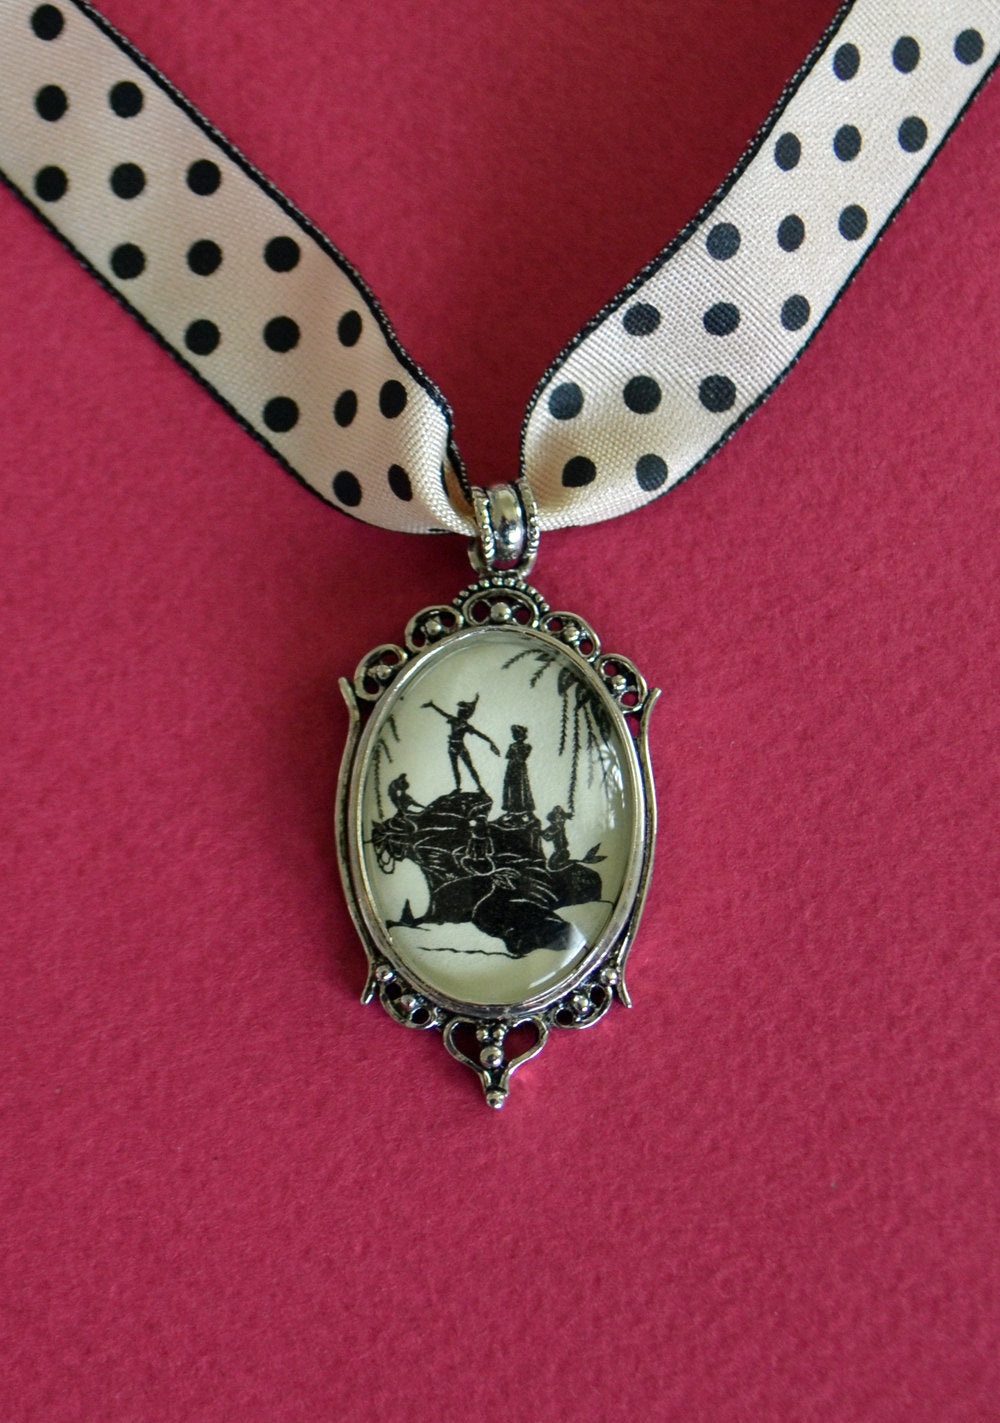 PETER PAN and the MERMAIDS Choker Necklace - pendant on ribbon - Silhouette Jewelry